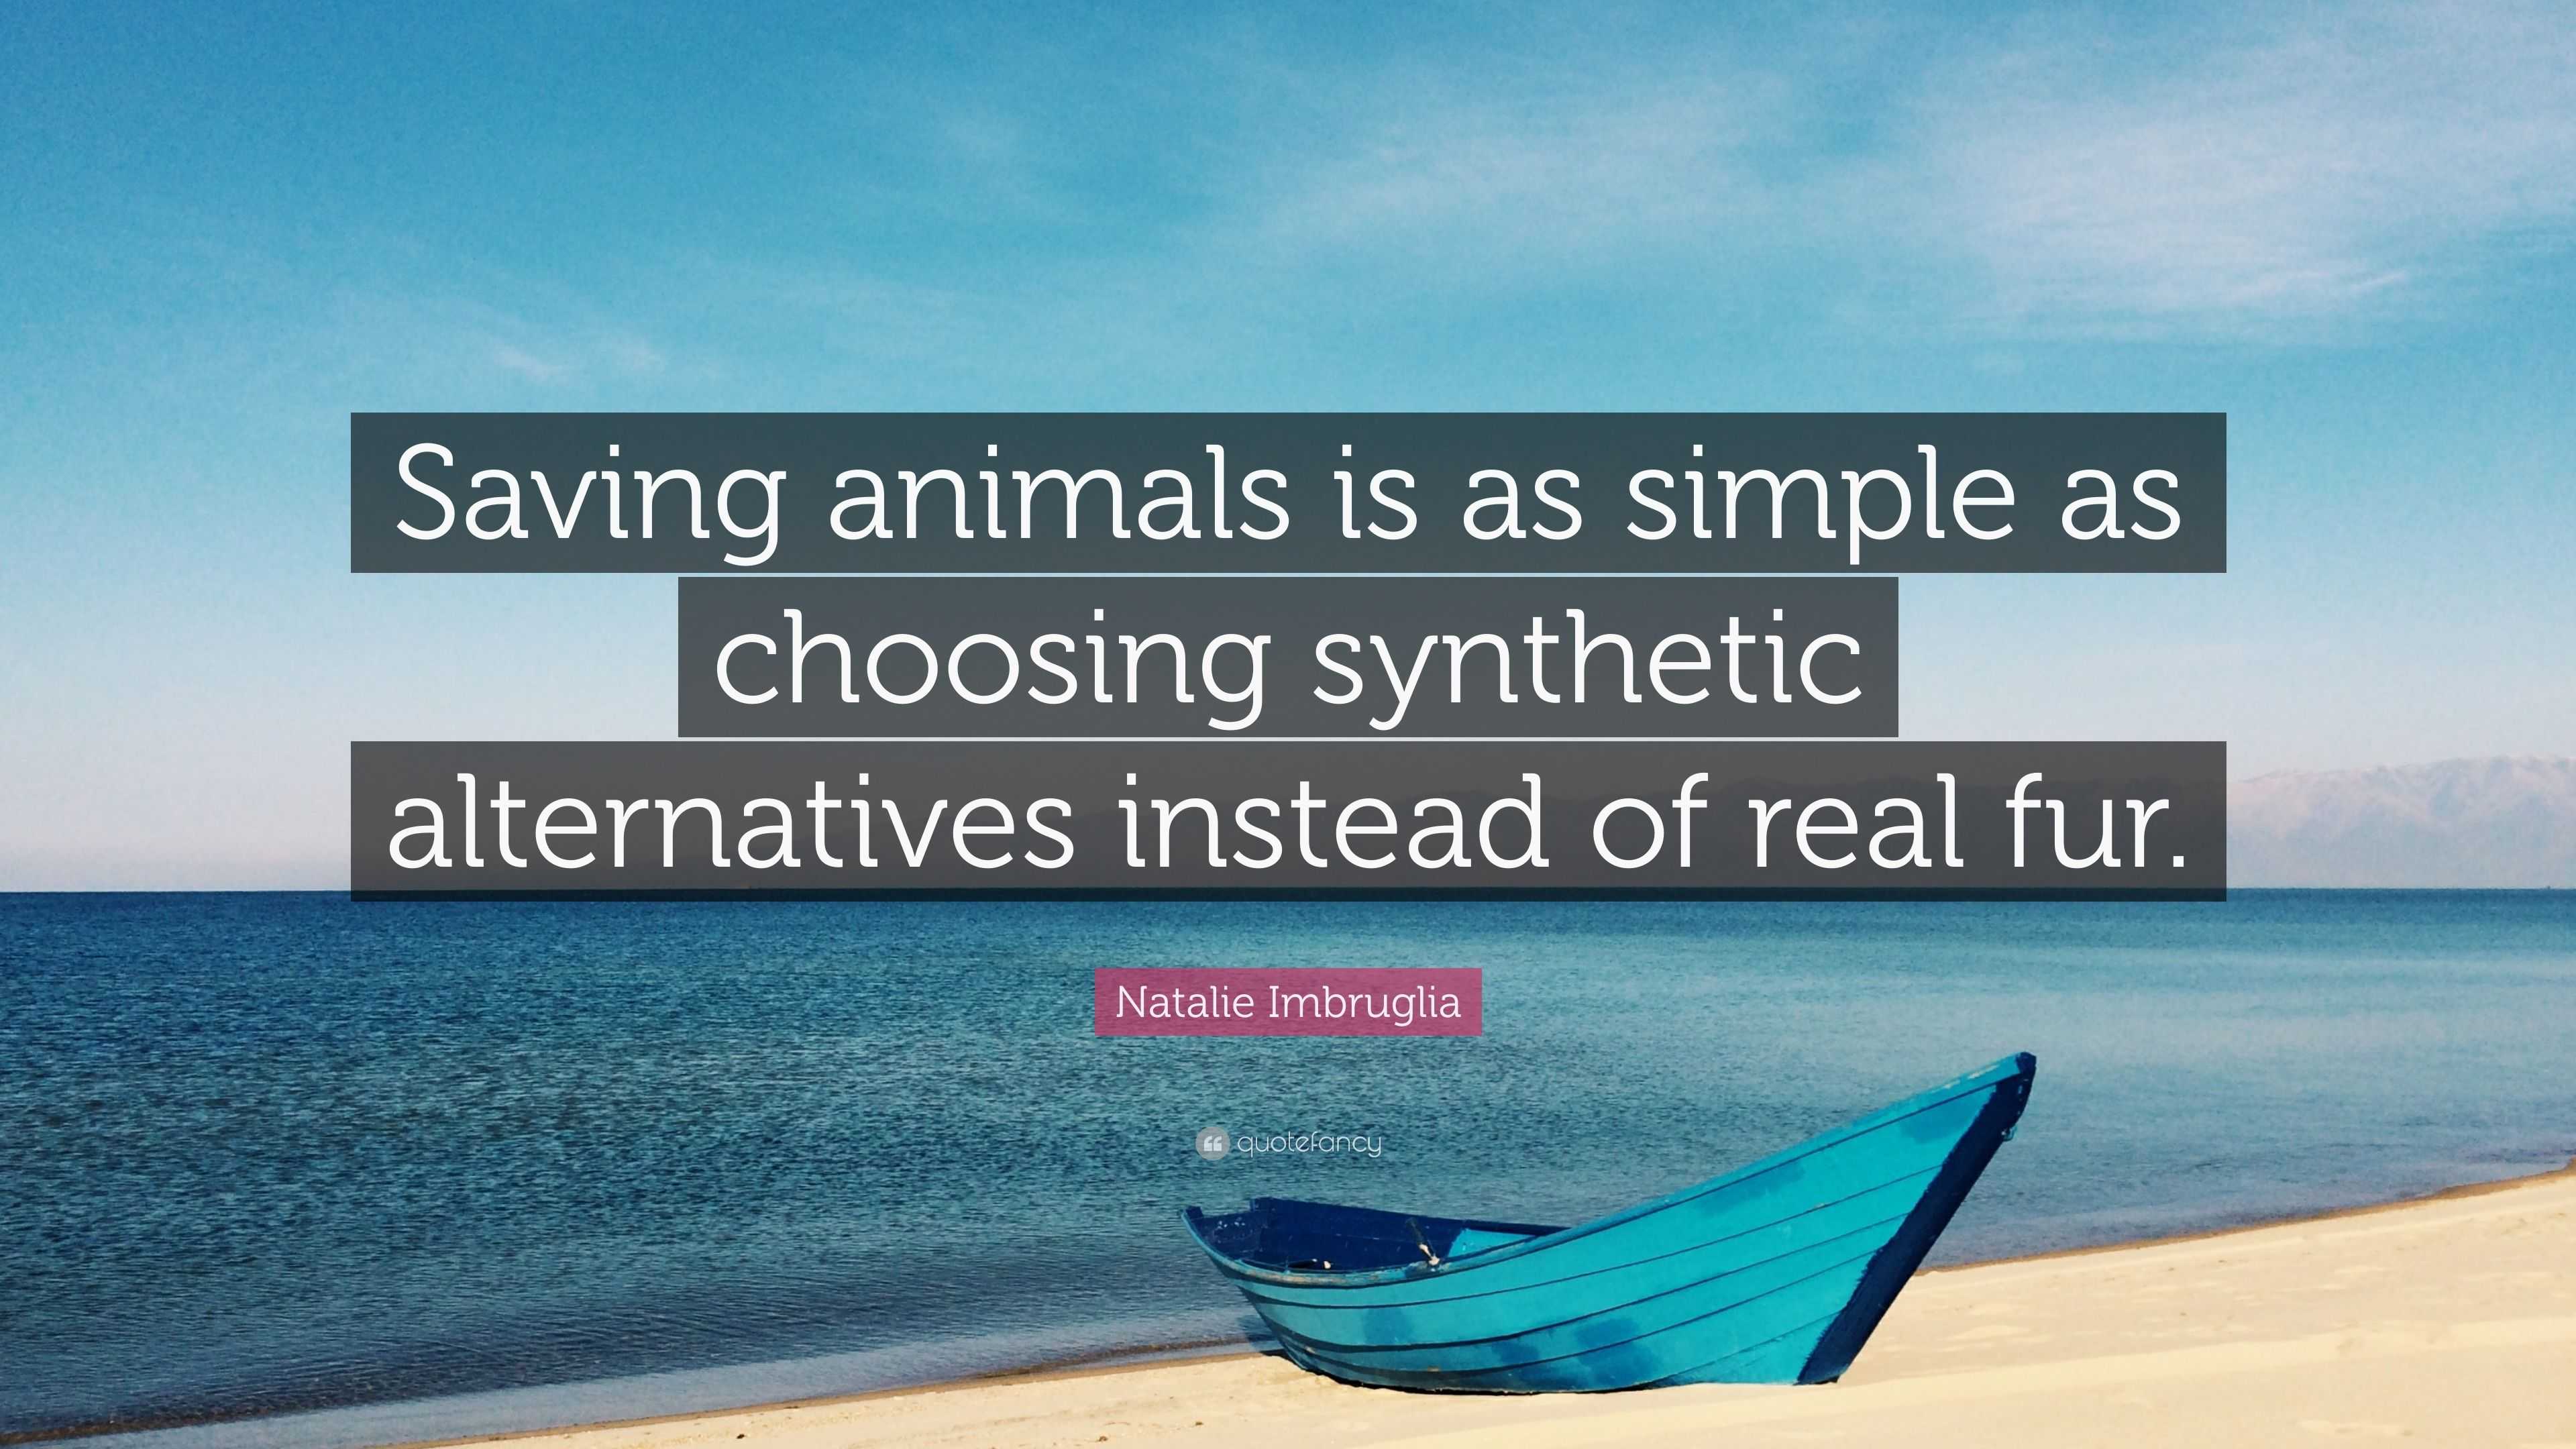 Natalie Imbruglia Quote: “Saving animals is as simple as choosing synthetic  alternatives instead of real fur.”